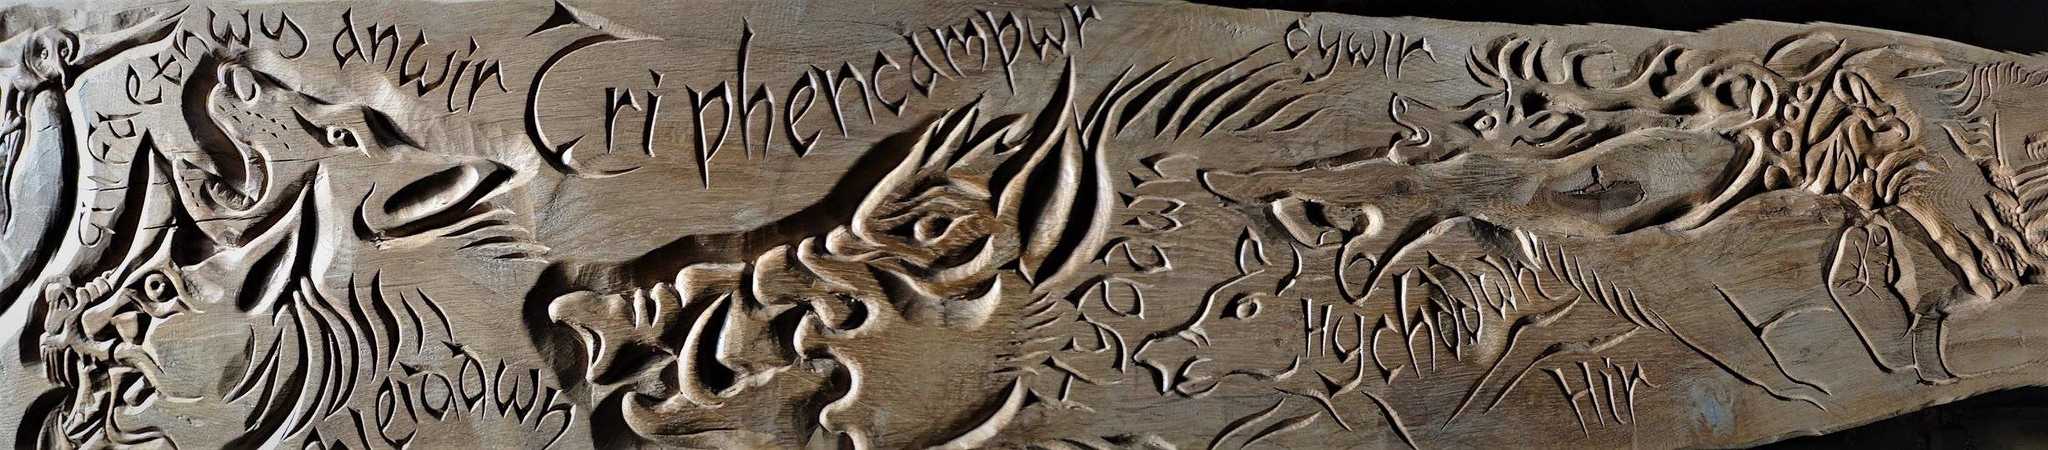 historic celtic carving